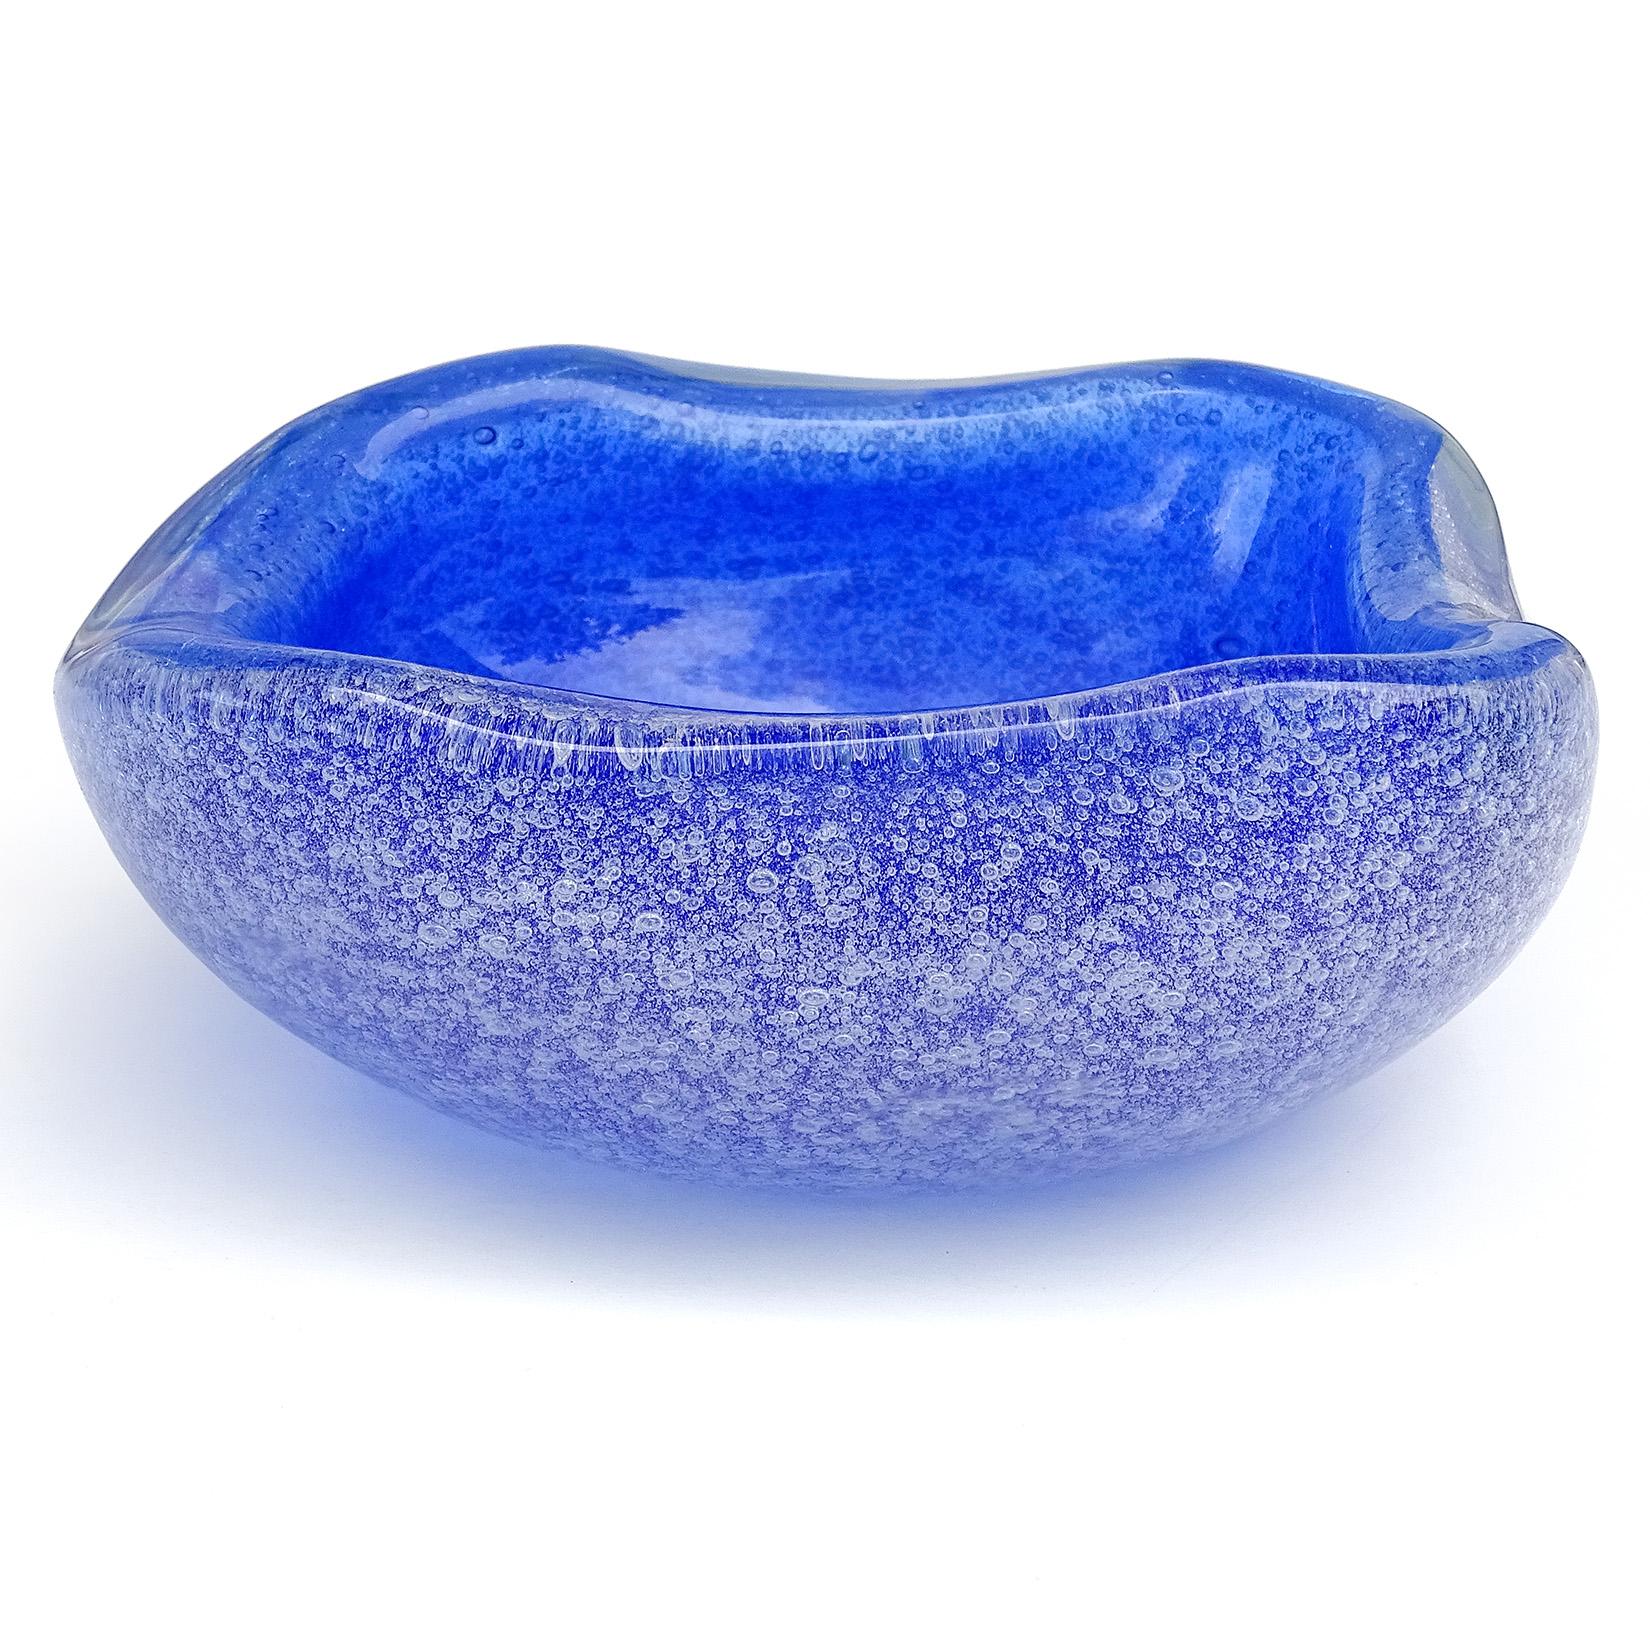 Beautiful vintage Murano hand blown Sommerso clear bubbles over cobalt blue Italian art glass decorative bowl, vide-poche. Documented to designer Archimede Seguso, with worn original red 